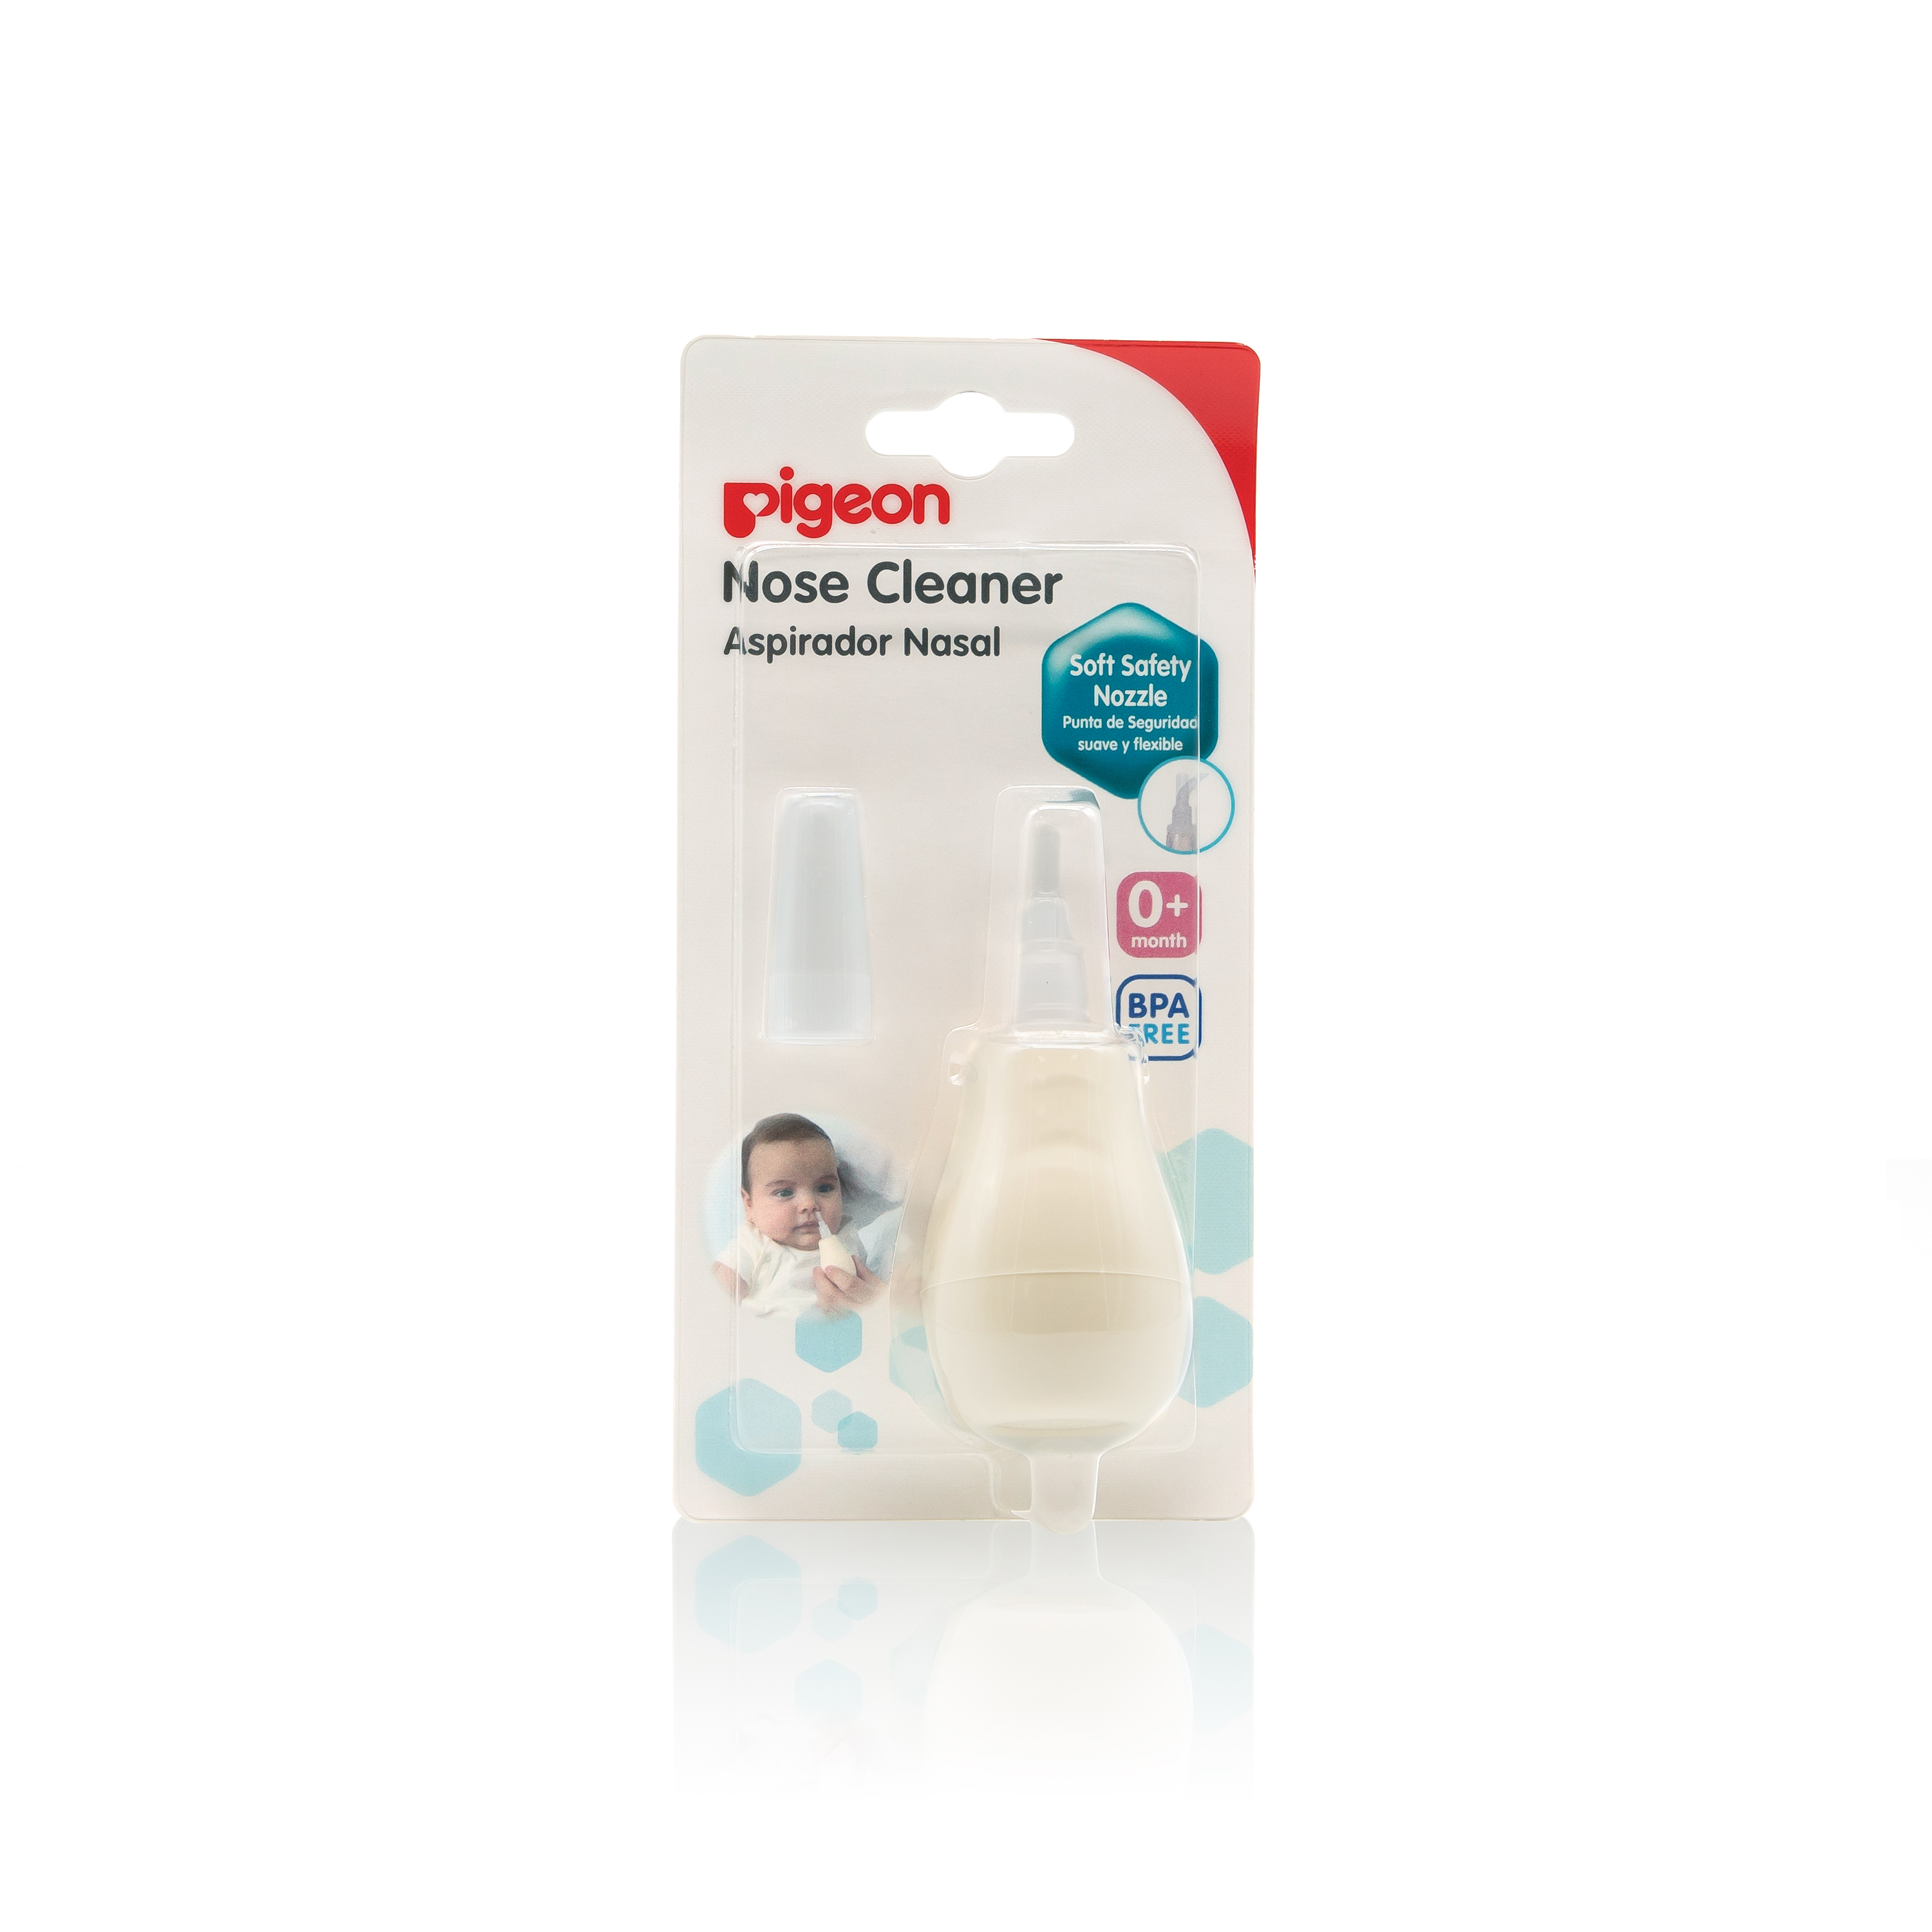 baby-fair Pigeon Nose Cleaner Blister Pack (PG-10559)